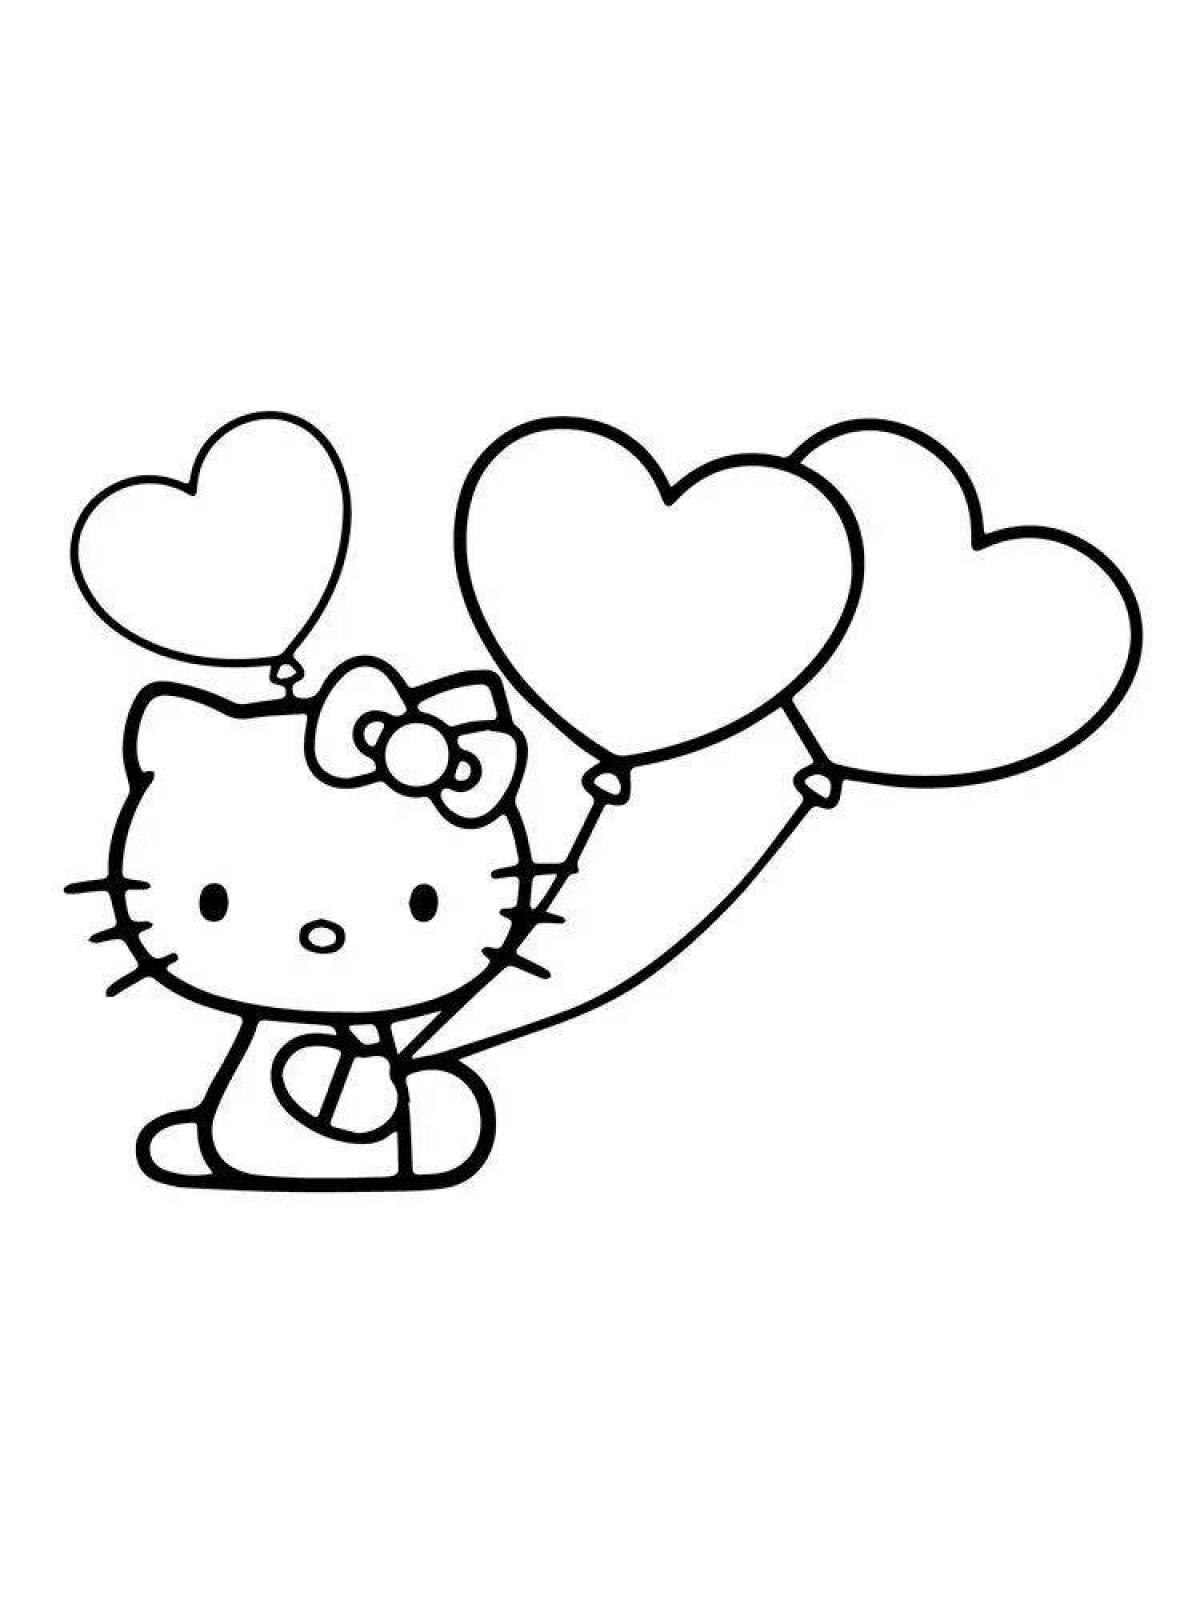 Coloring page playful cat with a heart